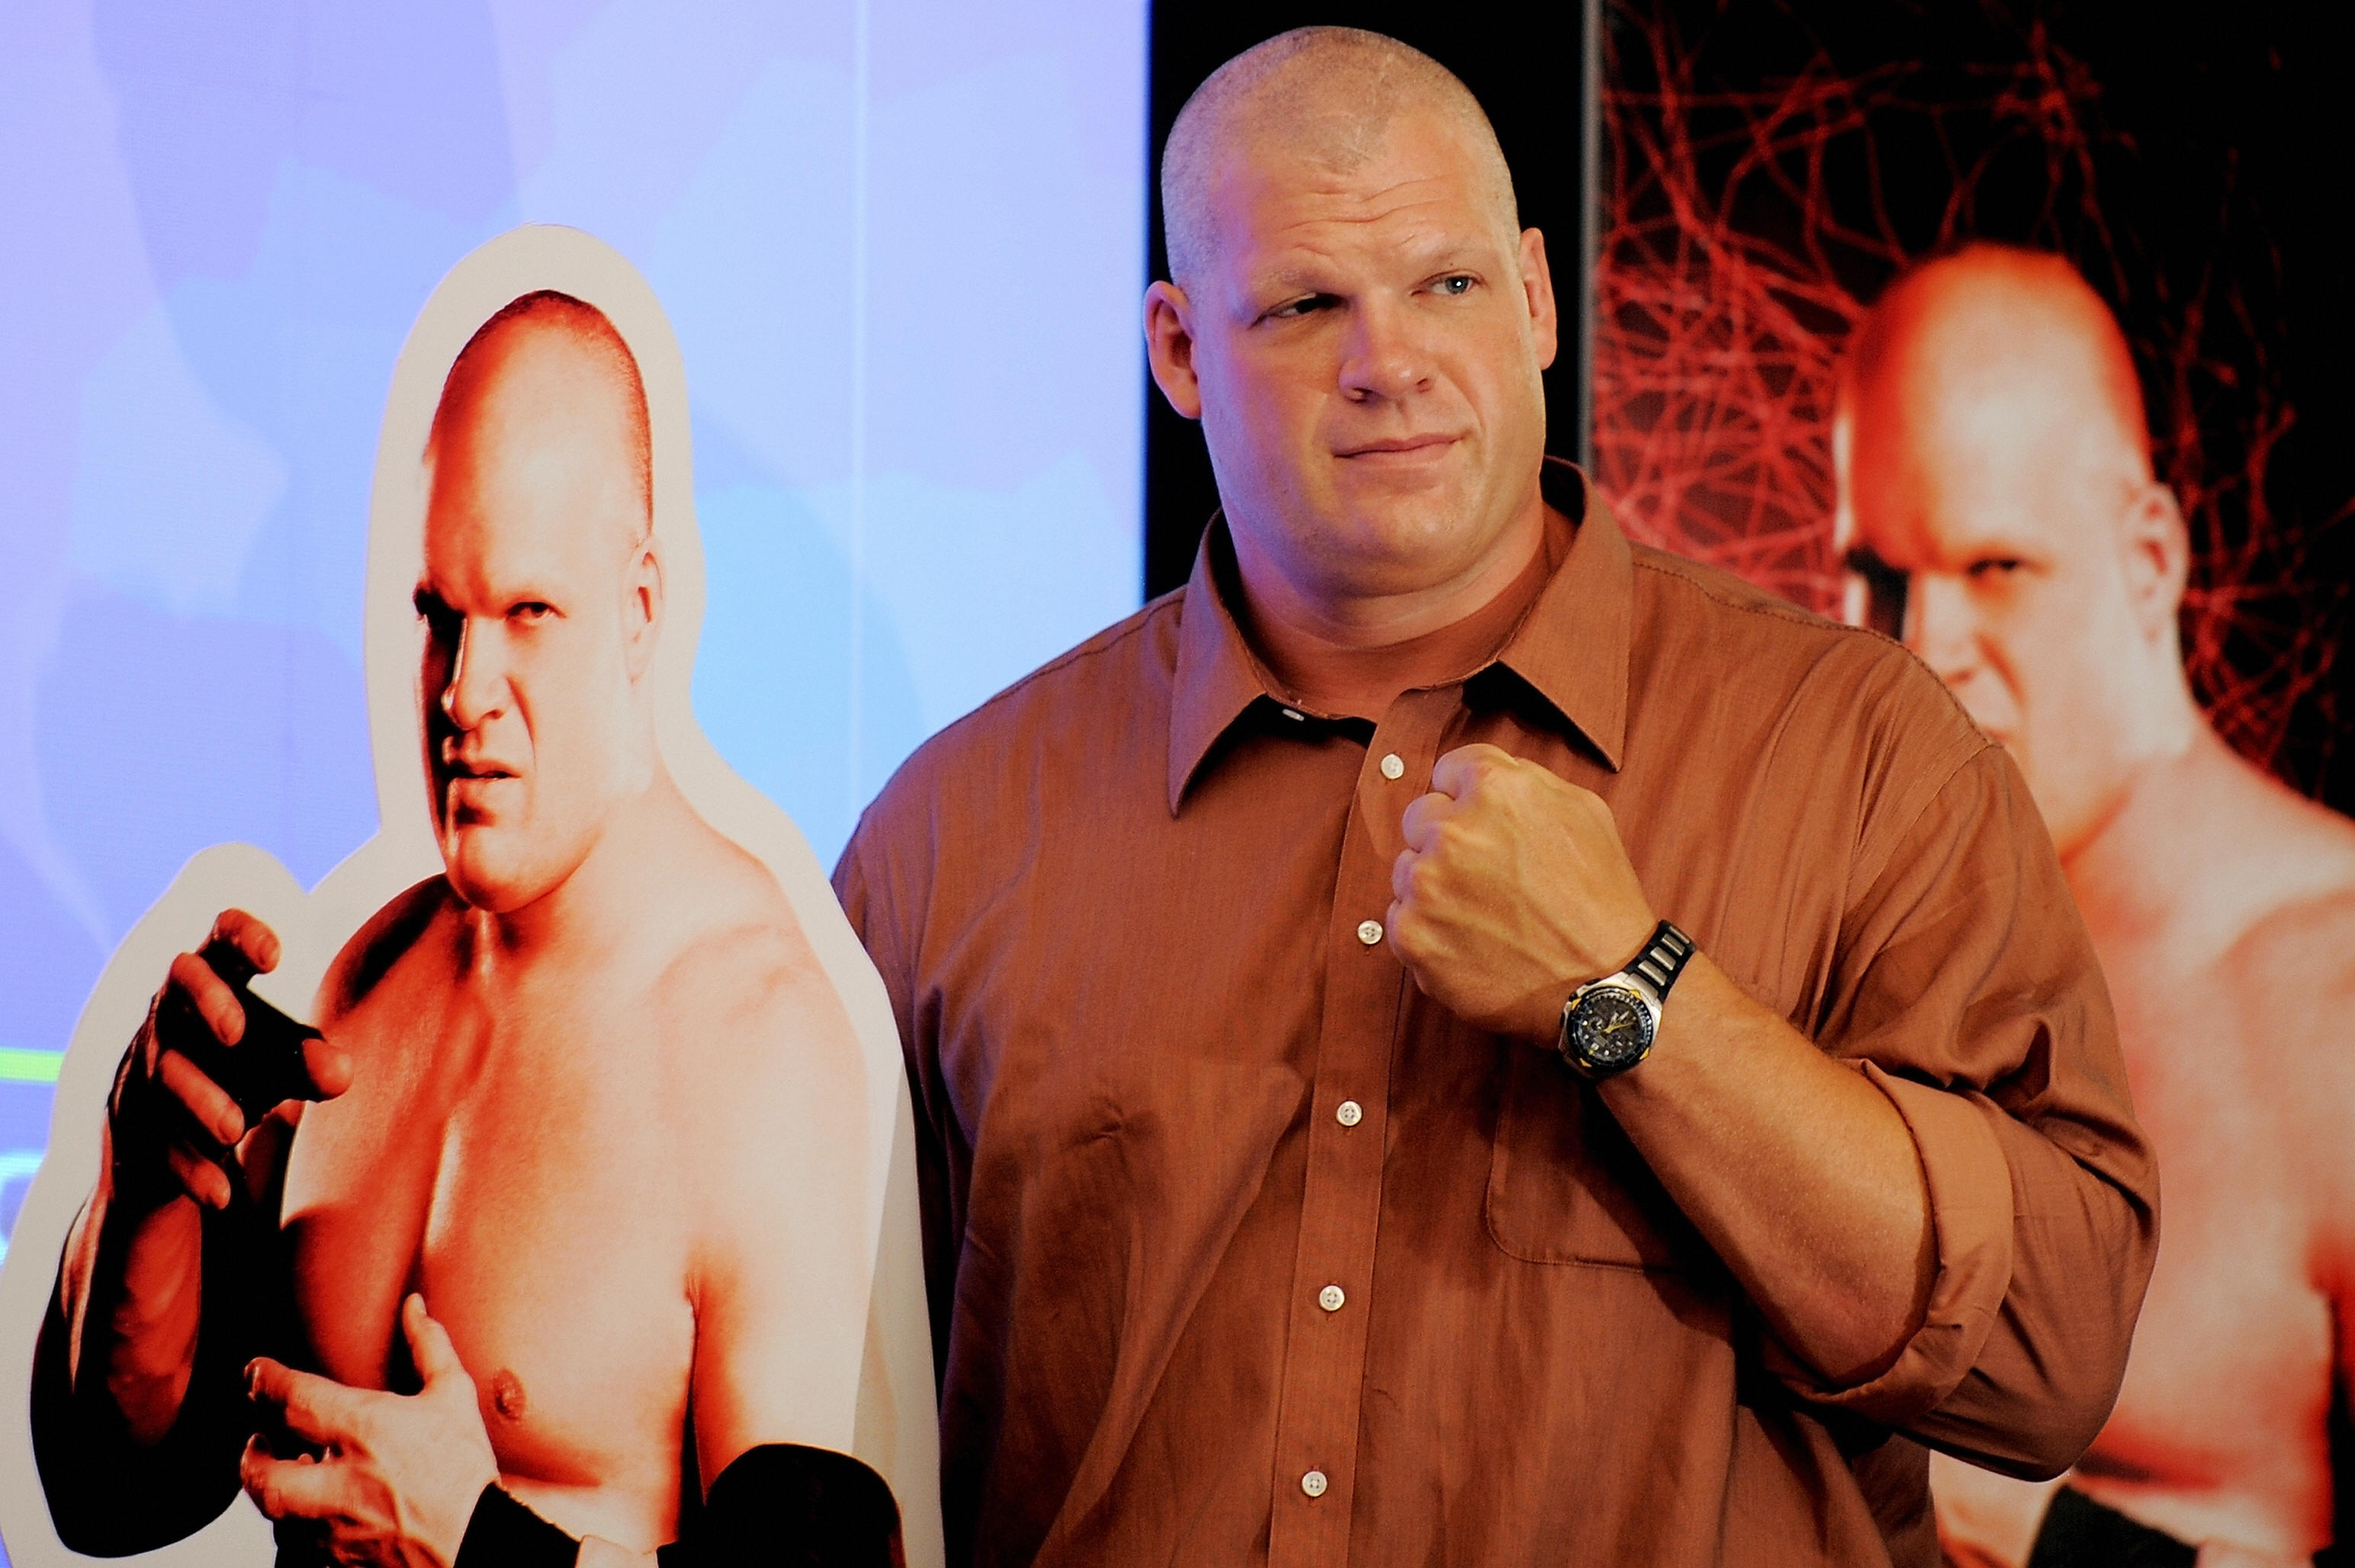 World Wrestling Entertainment (WWE) wrestler Kane poses during a promotional event in New Delhi on June 10, 2009. WWE's business focus is on professional wrestling, a simulated sport and performing art which combines wrestling with theater. Kane is currently on the largest professional wrestling promotion tour in the world, which offers an extensive video library of professional wrestling history. AFP PHOTO/ MANAN VATSYAYANA (Photo credit should read MANAN VATSYAYANA/AFP/Getty Images)